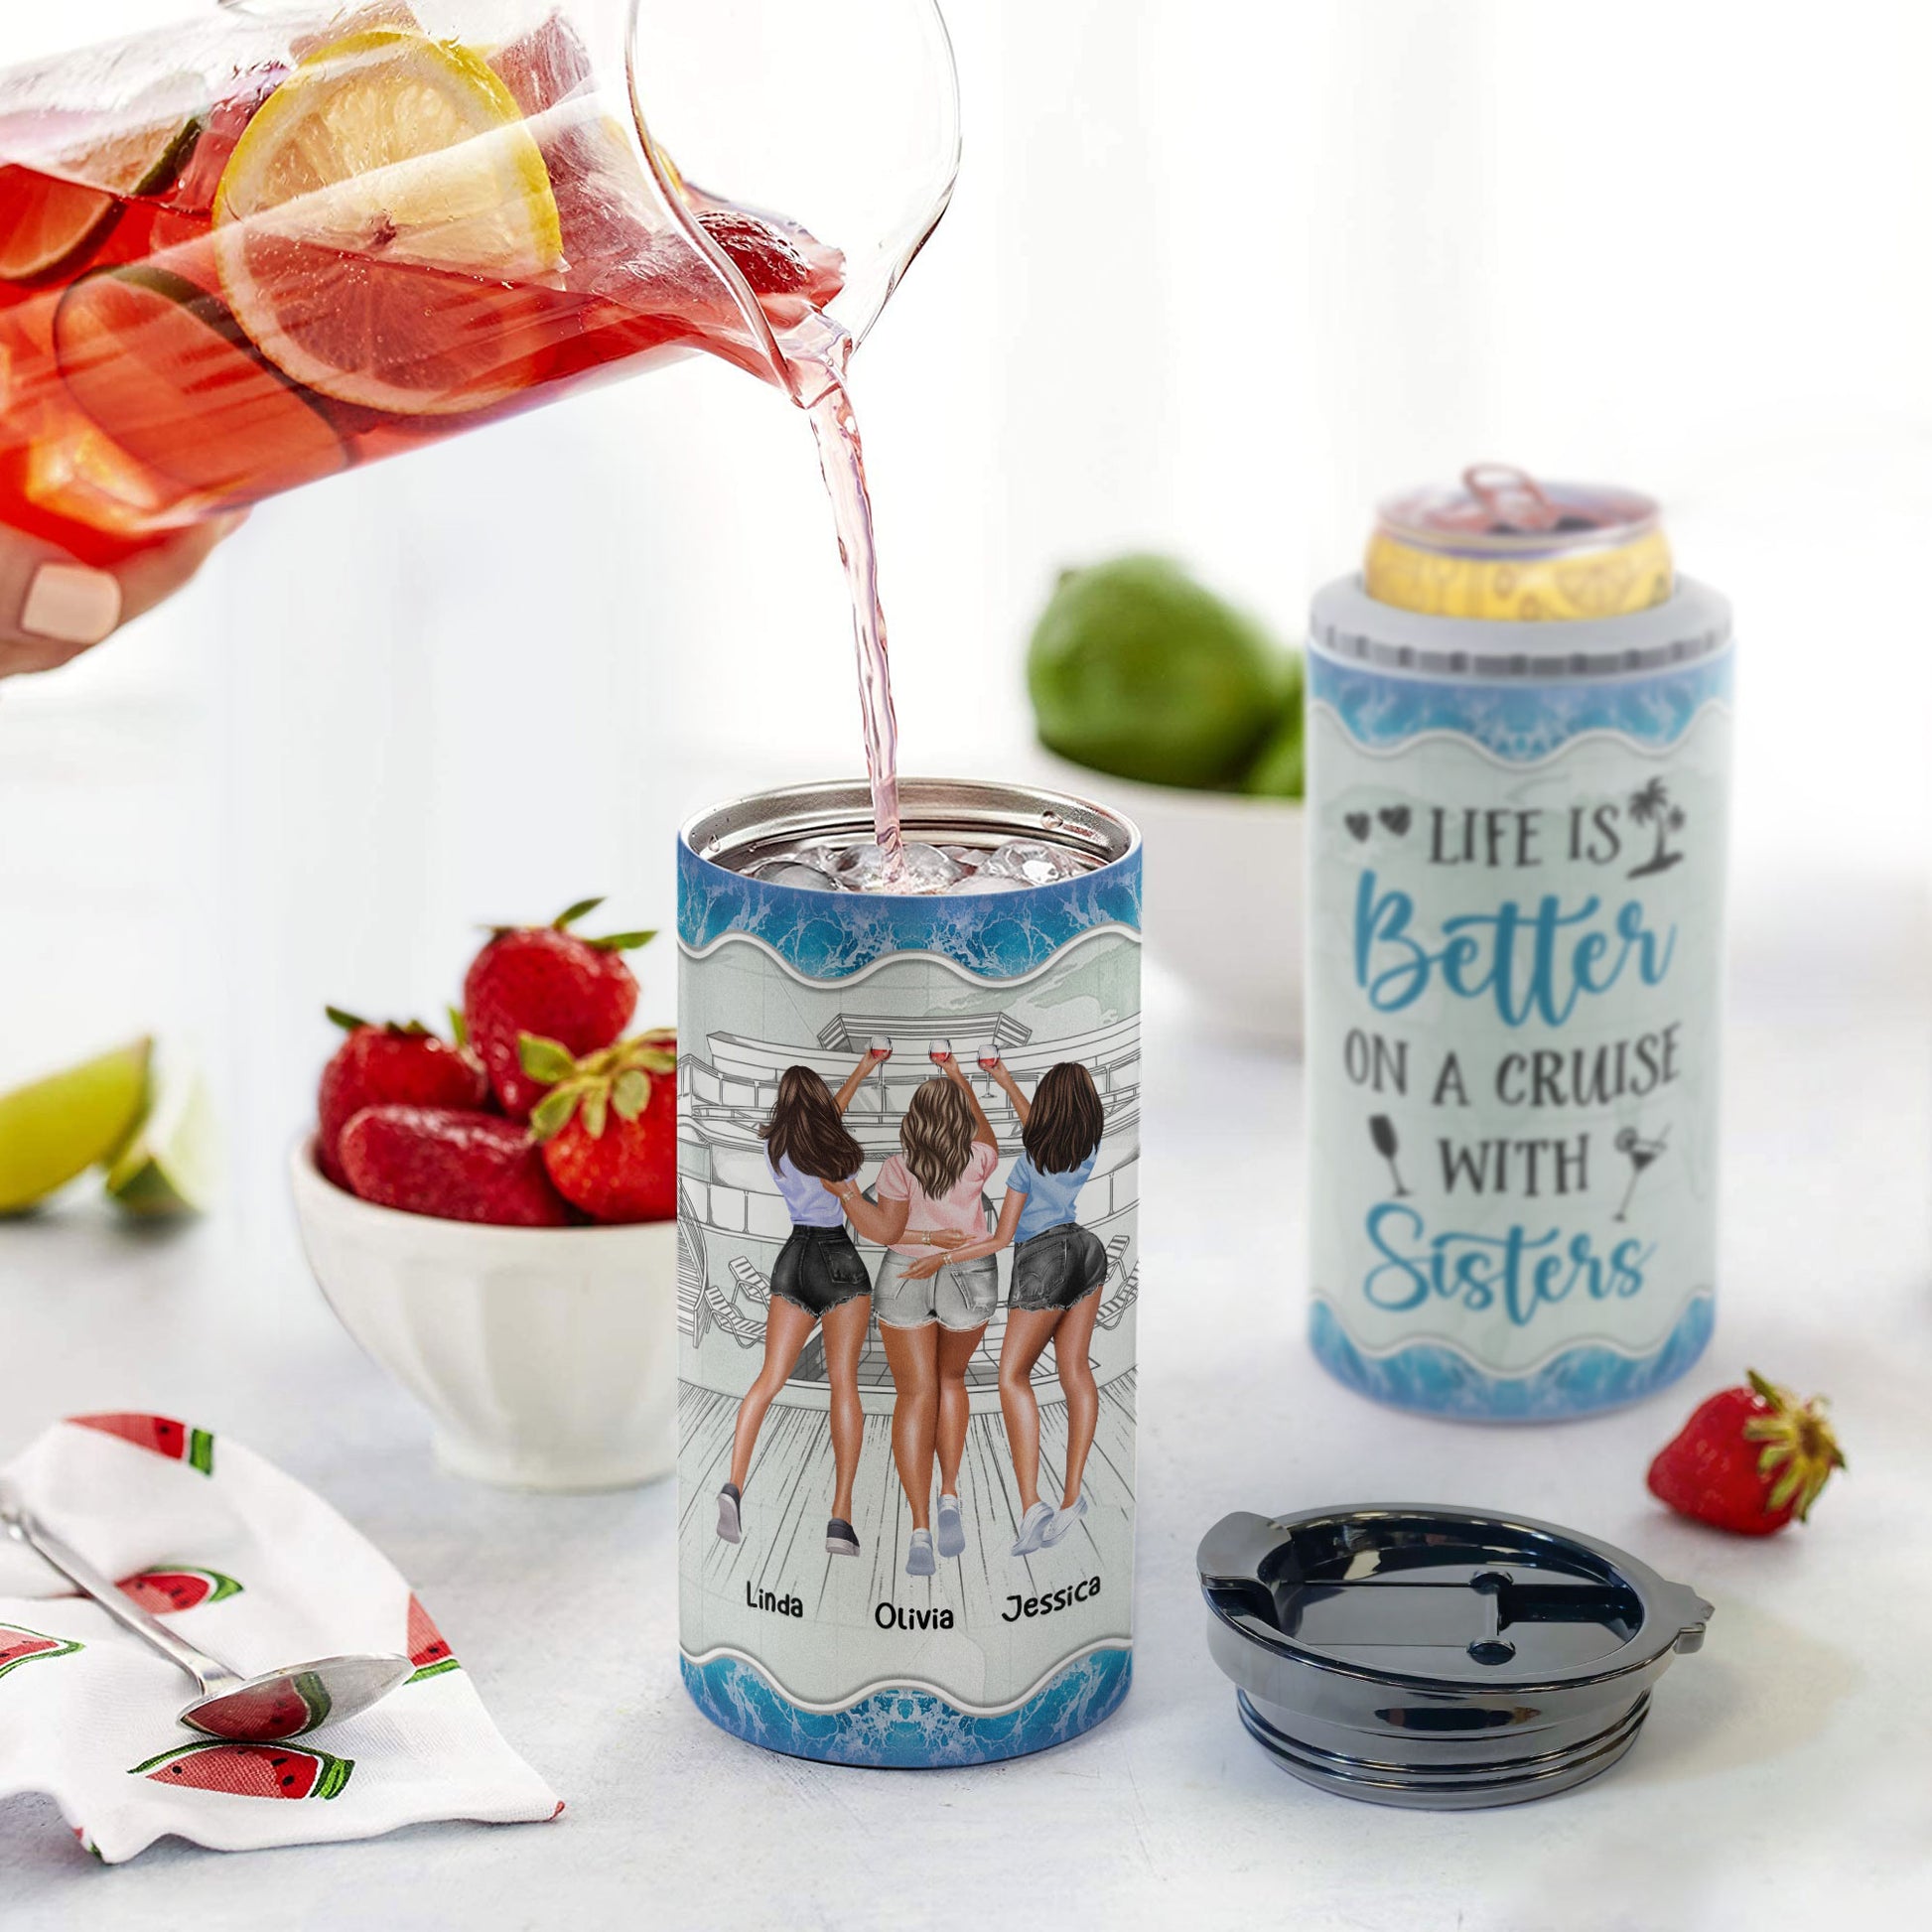 Life Is Better On A Cruise - Personalized Can Cooler